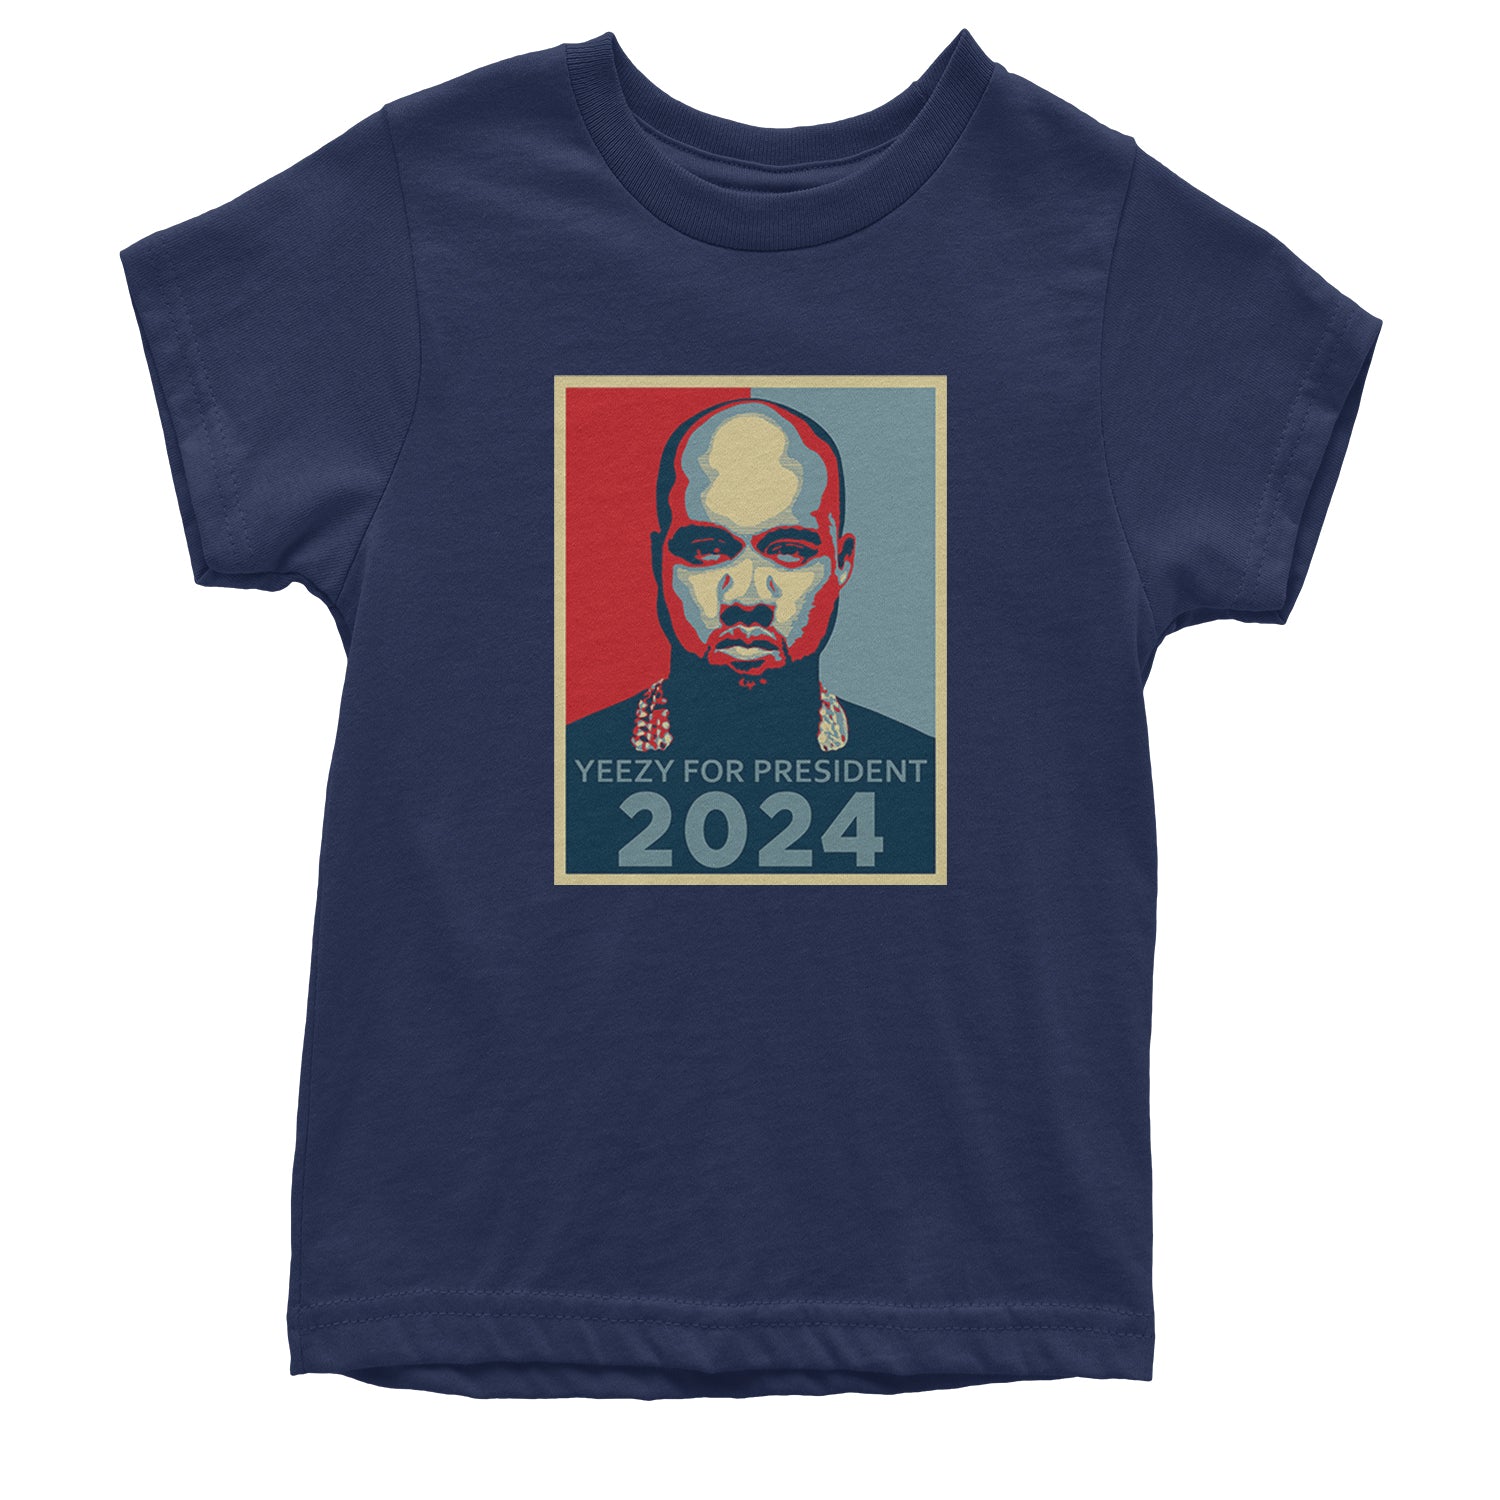 Yeezus For President Vote for Ye Youth T-shirt Navy Blue